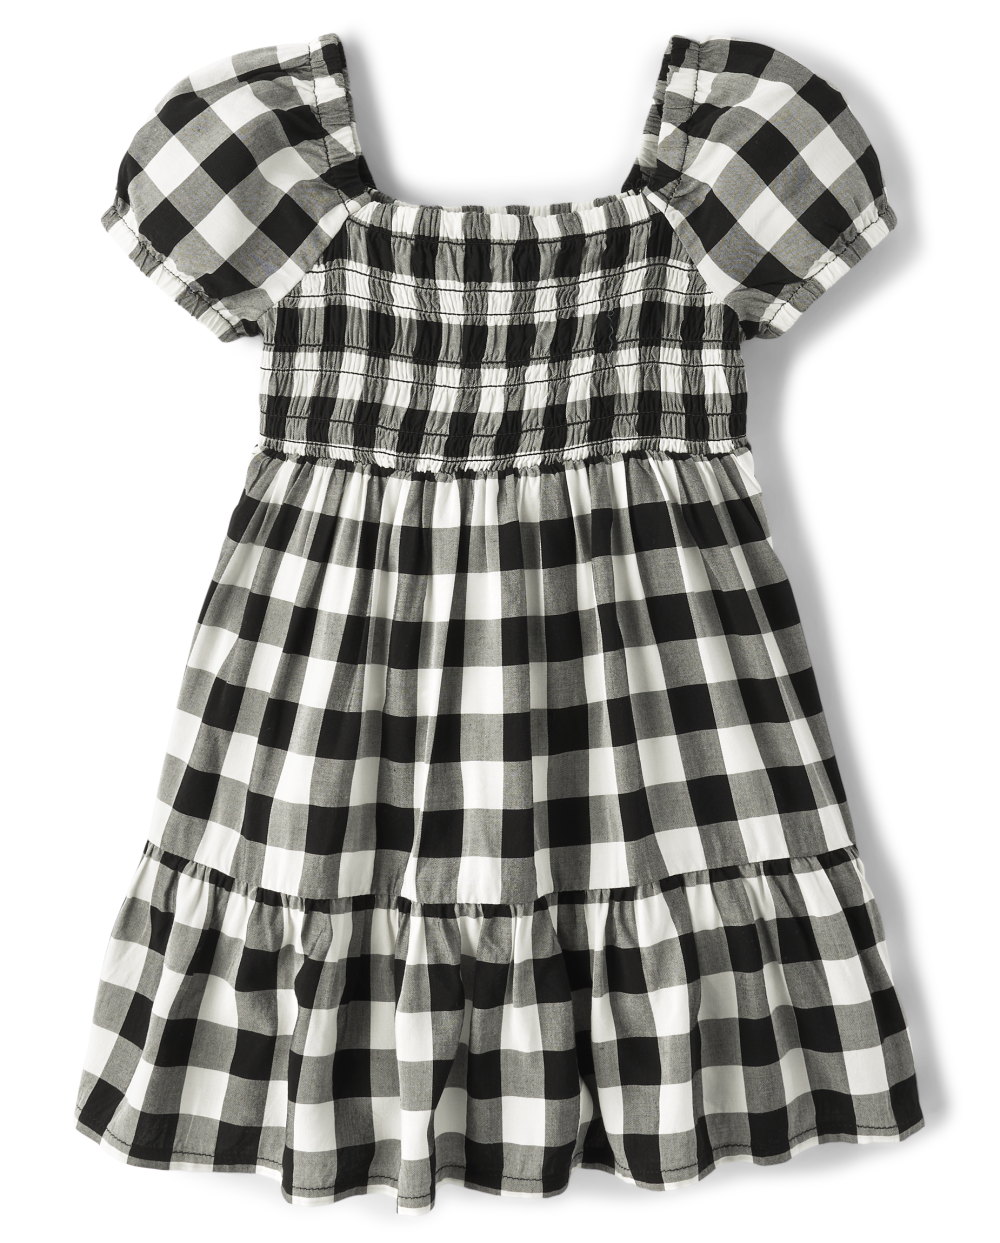 Toddler Puff Sleeves Short Sleeves Sleeves Smocked Square Neck Rayon Above the Knee Checkered Gingham Print Dress With Ruffles